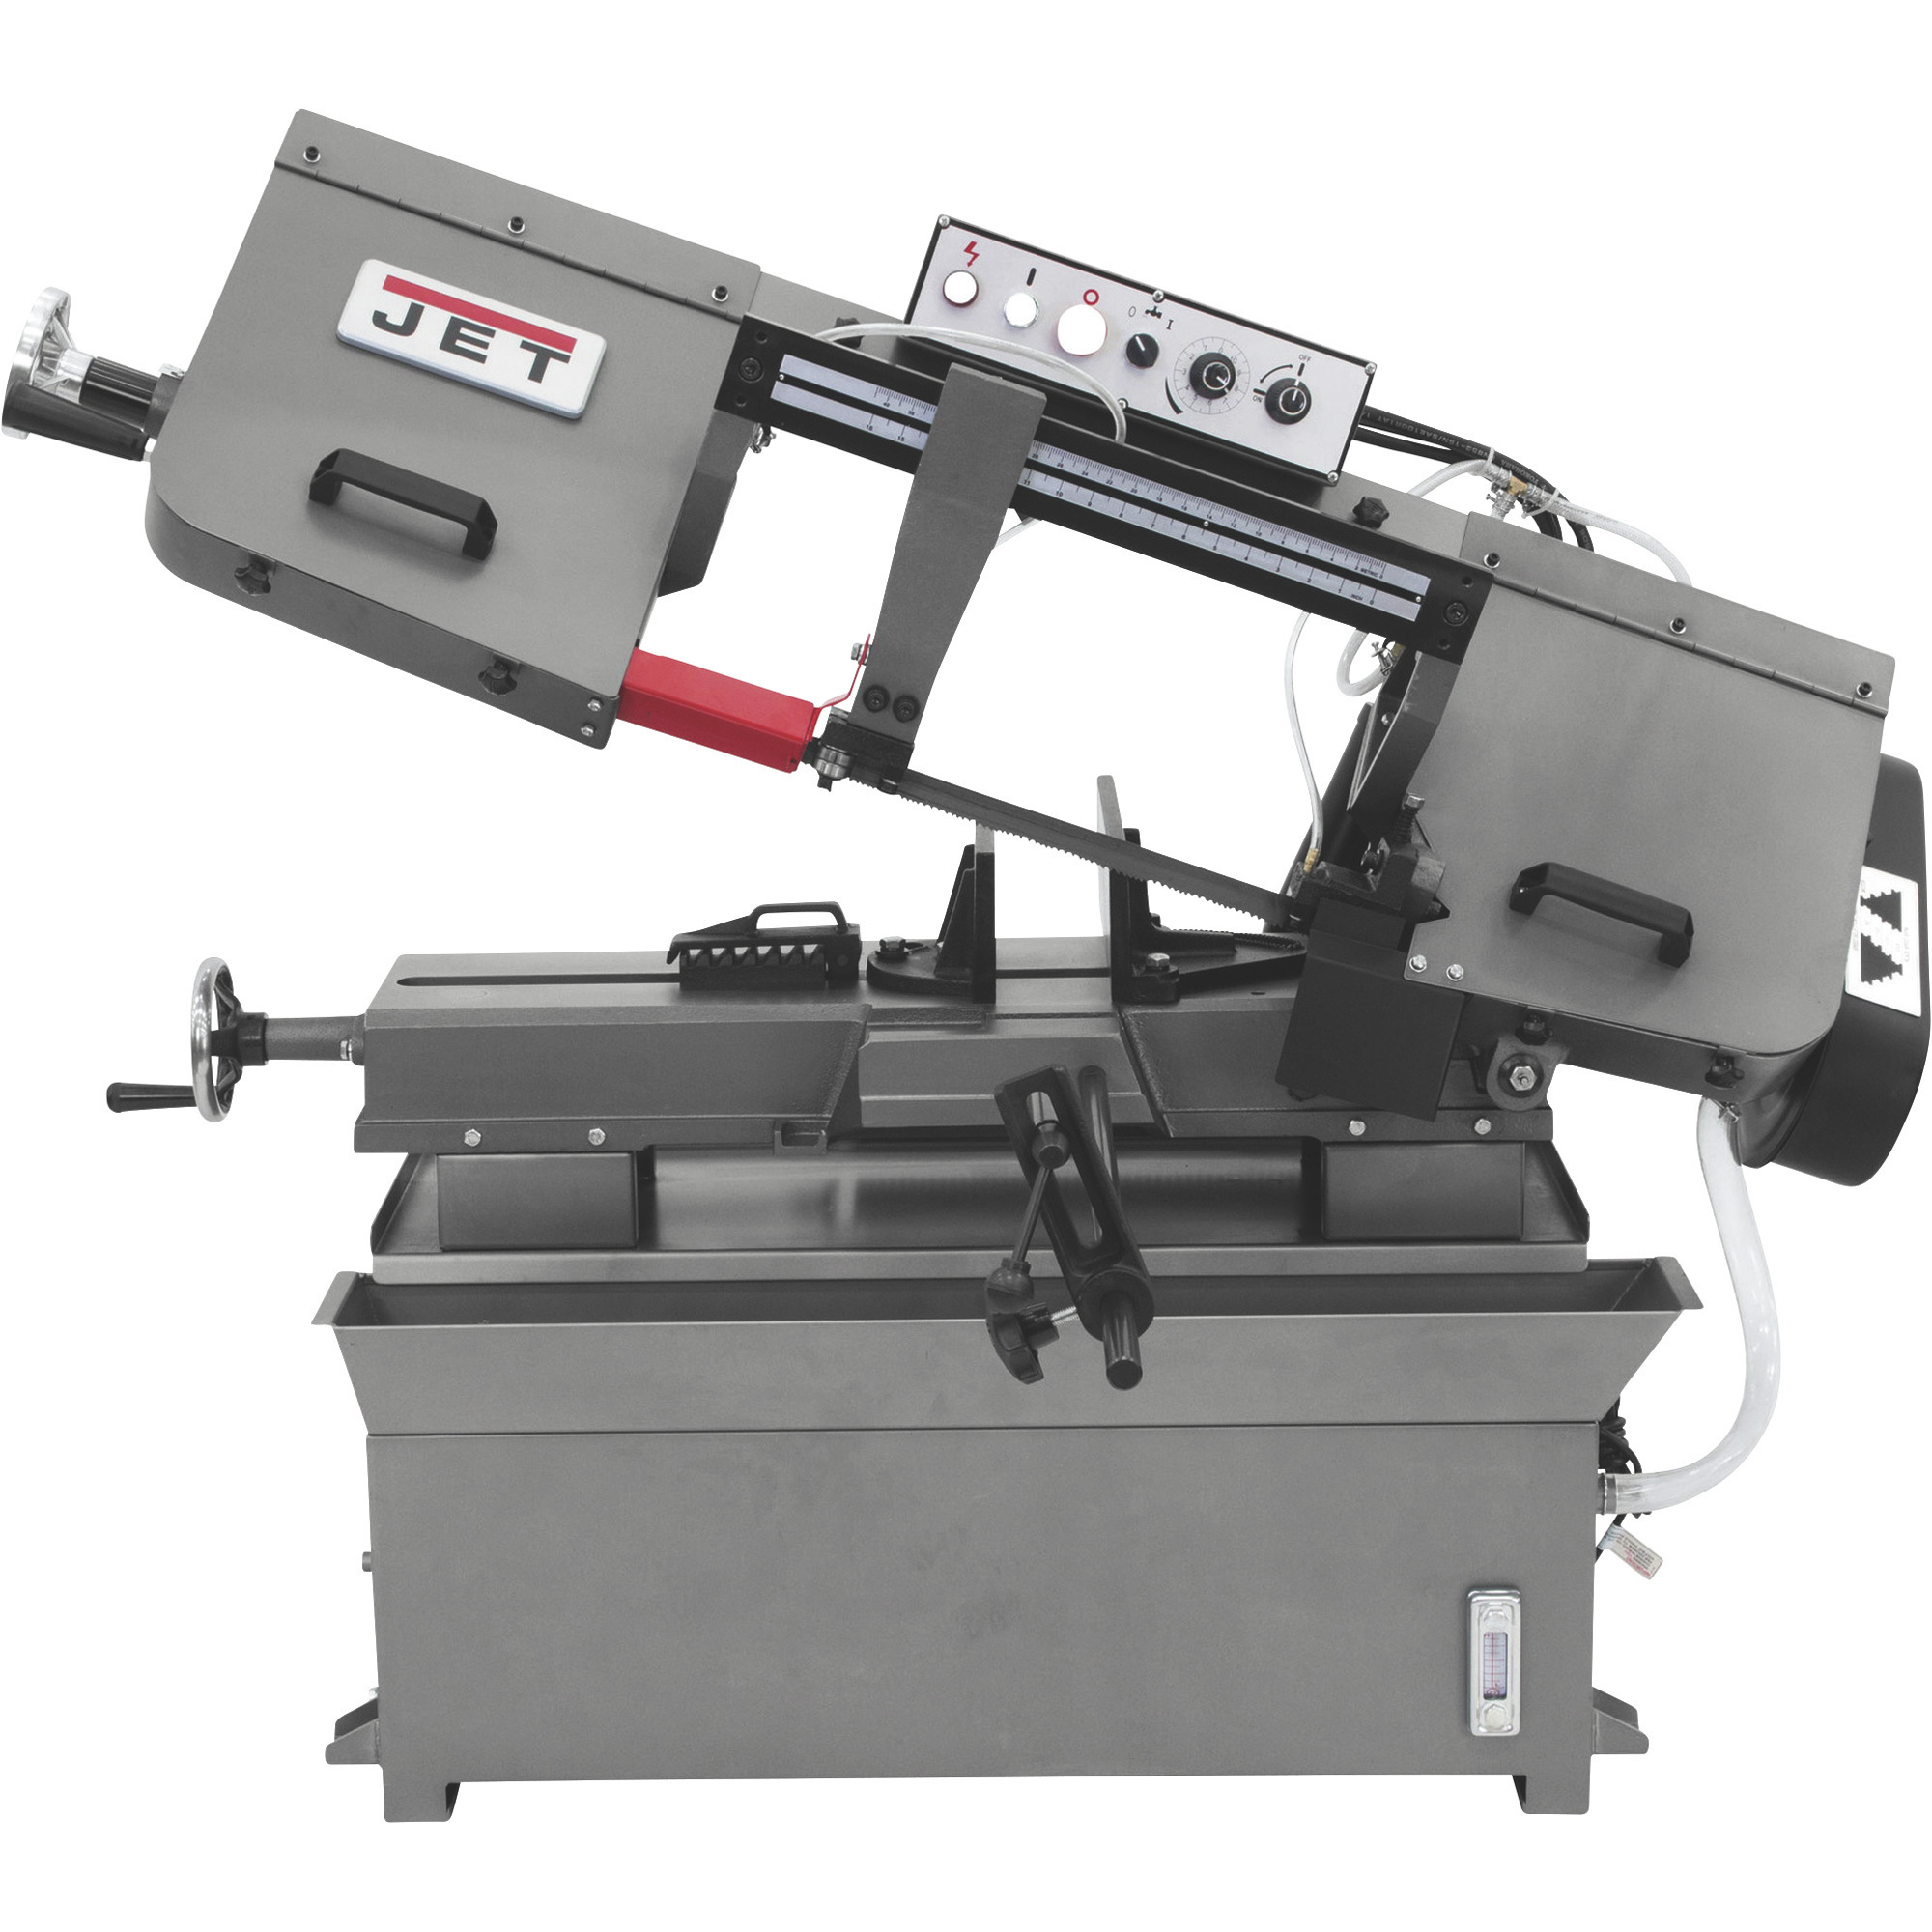 JET Horizontal Metal Cutting Band Saw 9in. x 16in., Model# HBS-916W | Northern Tool